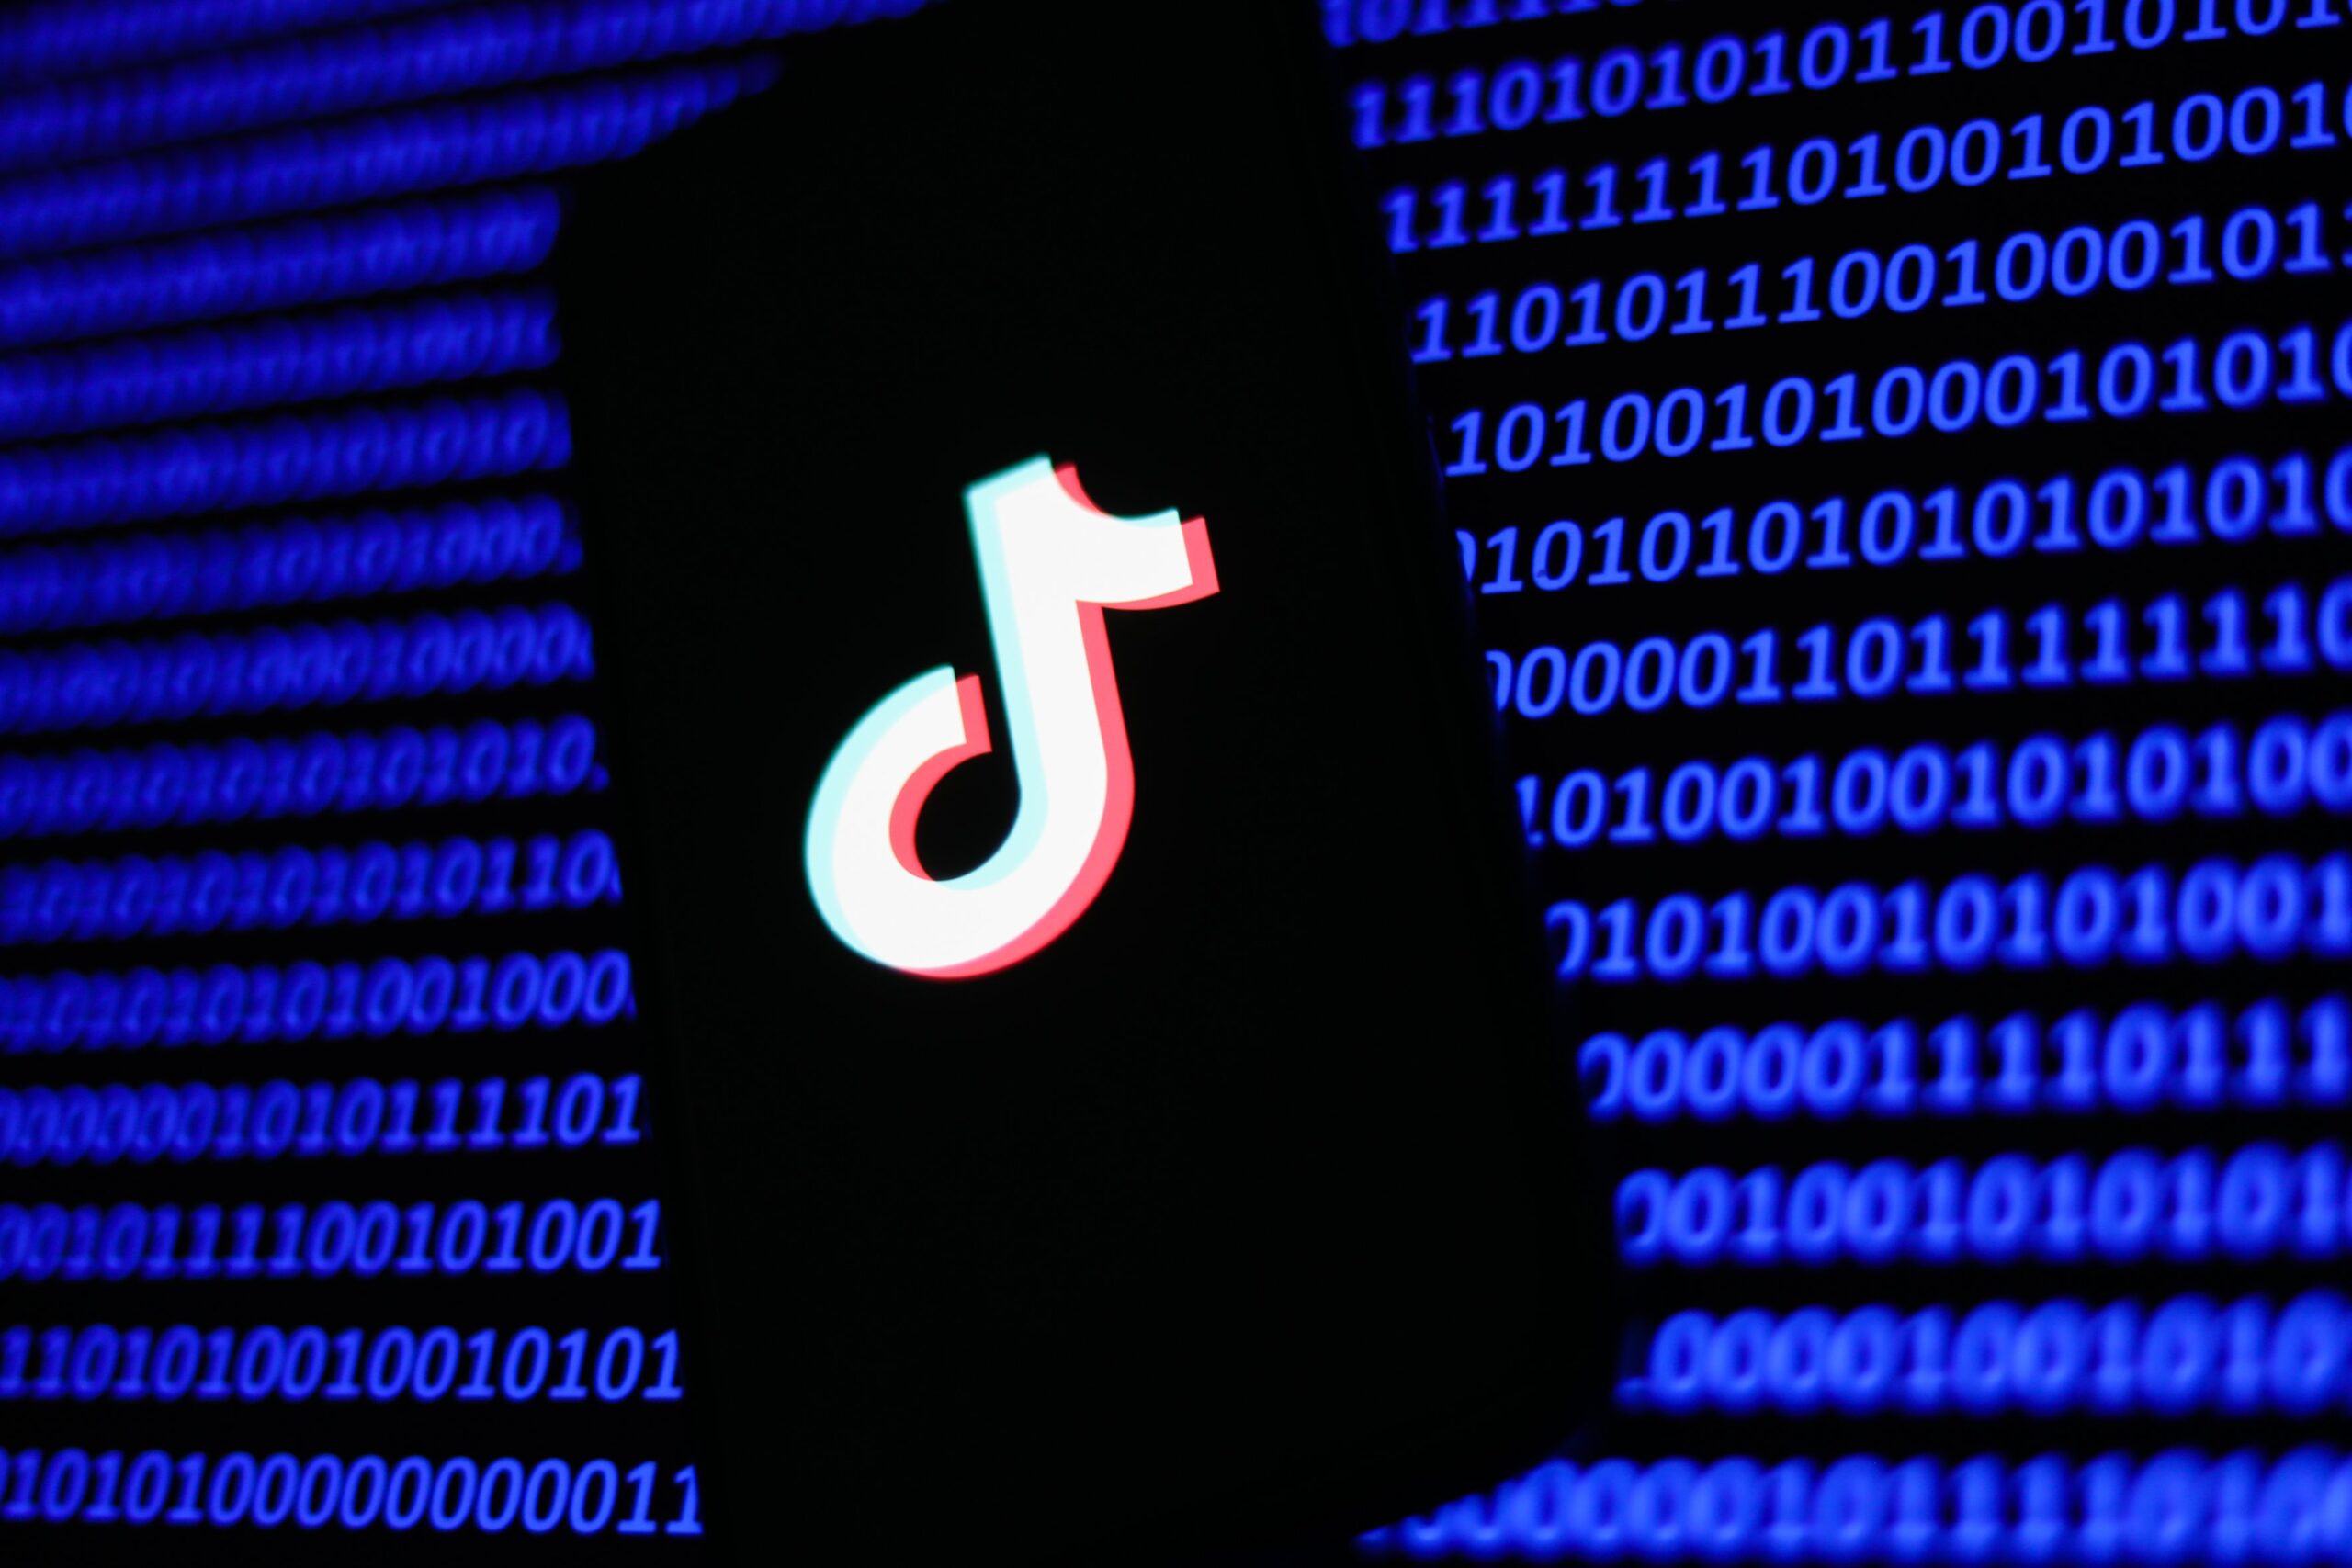 A phone showing the TikTok label in front of lines of binary code.